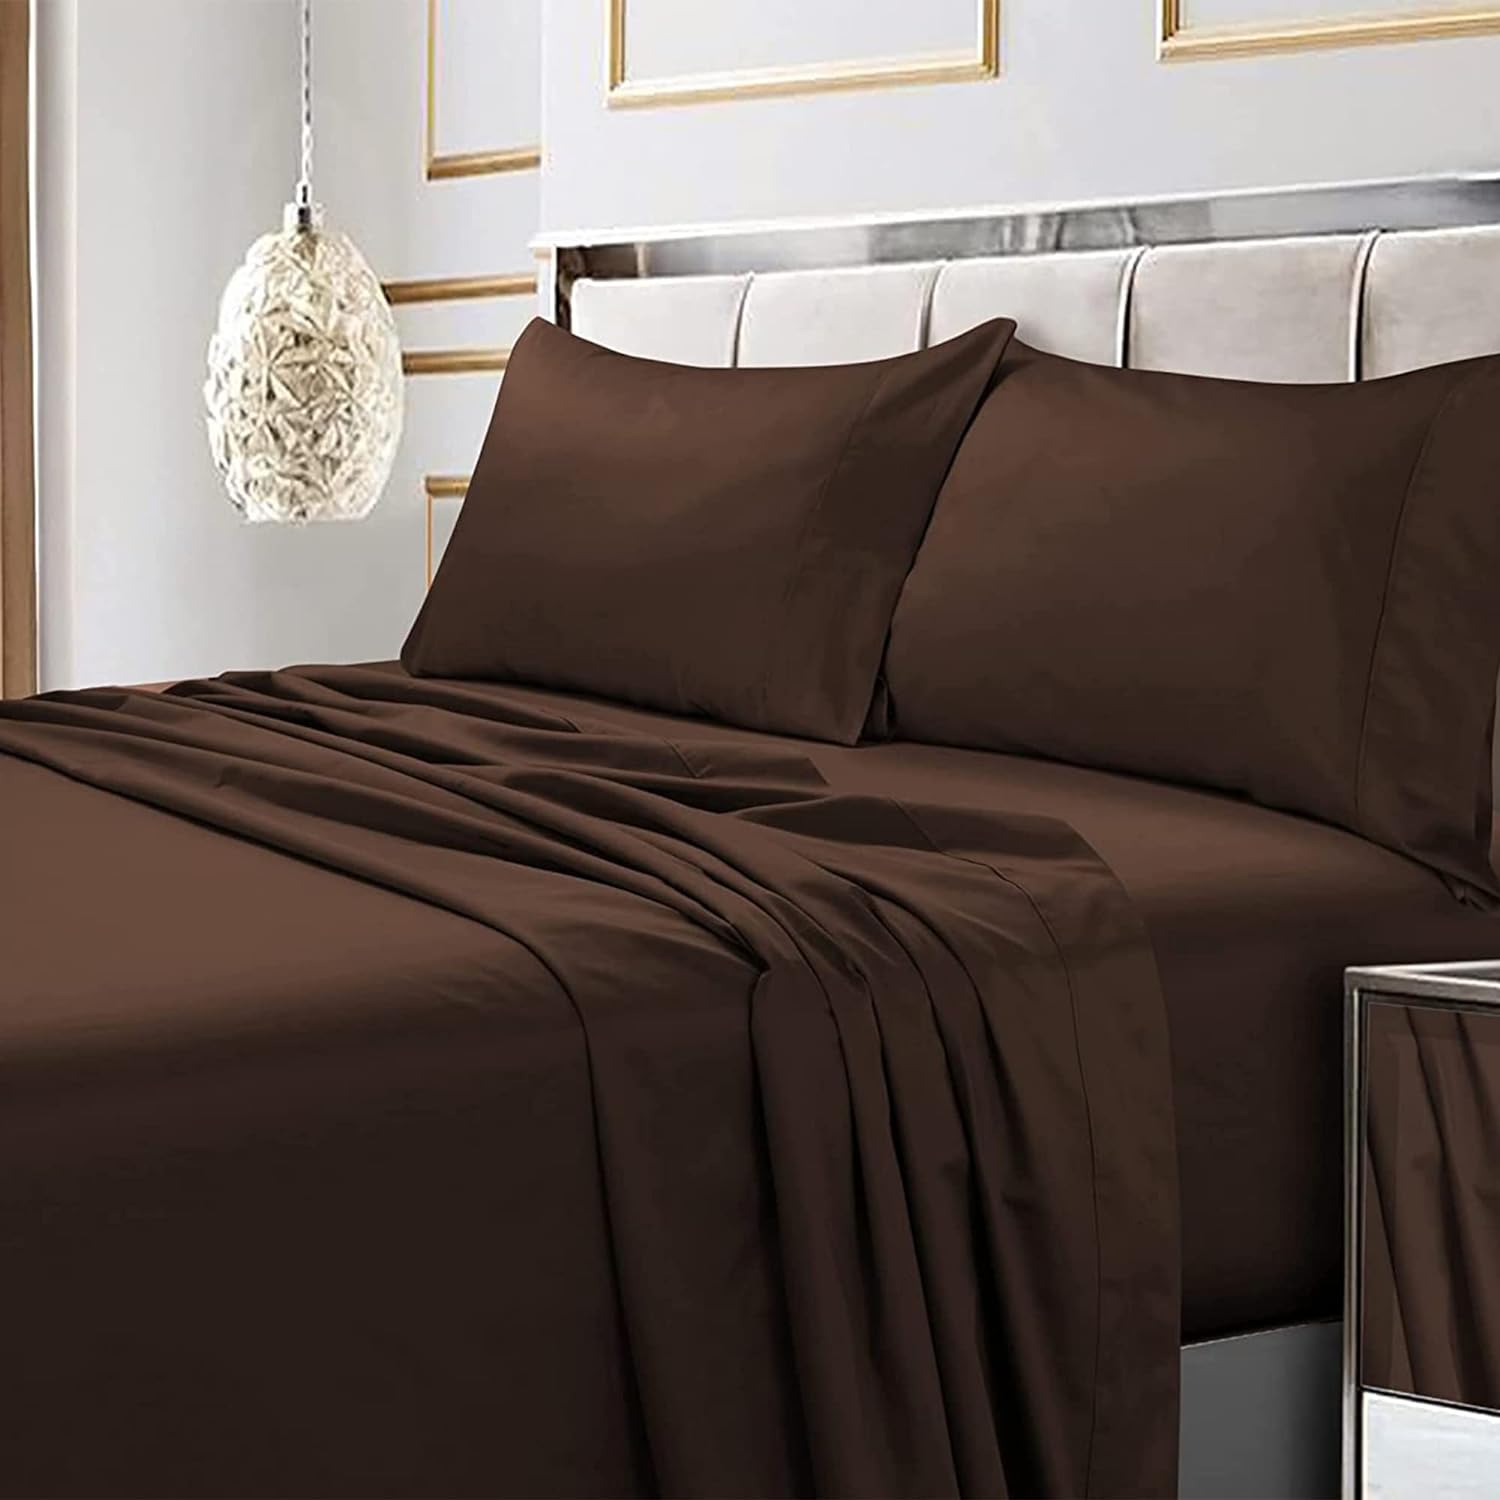 Tribeca Living Soft Egyptian Cotton Sateen Solid Pillowcase Set Extra Deep Pocket, 600 Thread Count, Bed Sheet, Queen, Chocolate